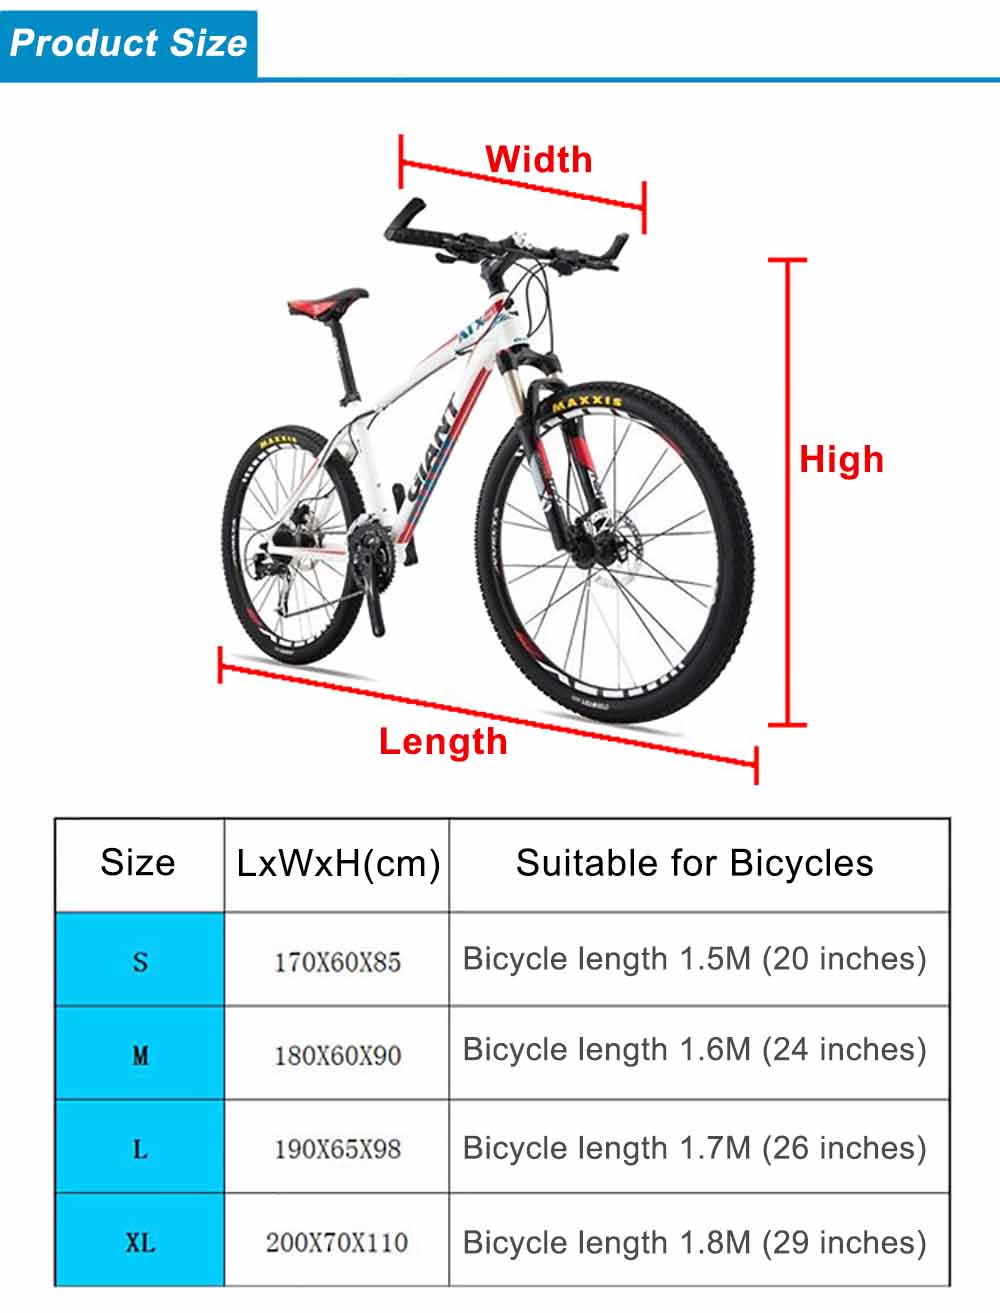 Bicycle Cover Universal for 29 Inch BTM Touring Road Bike Waterproof Protector